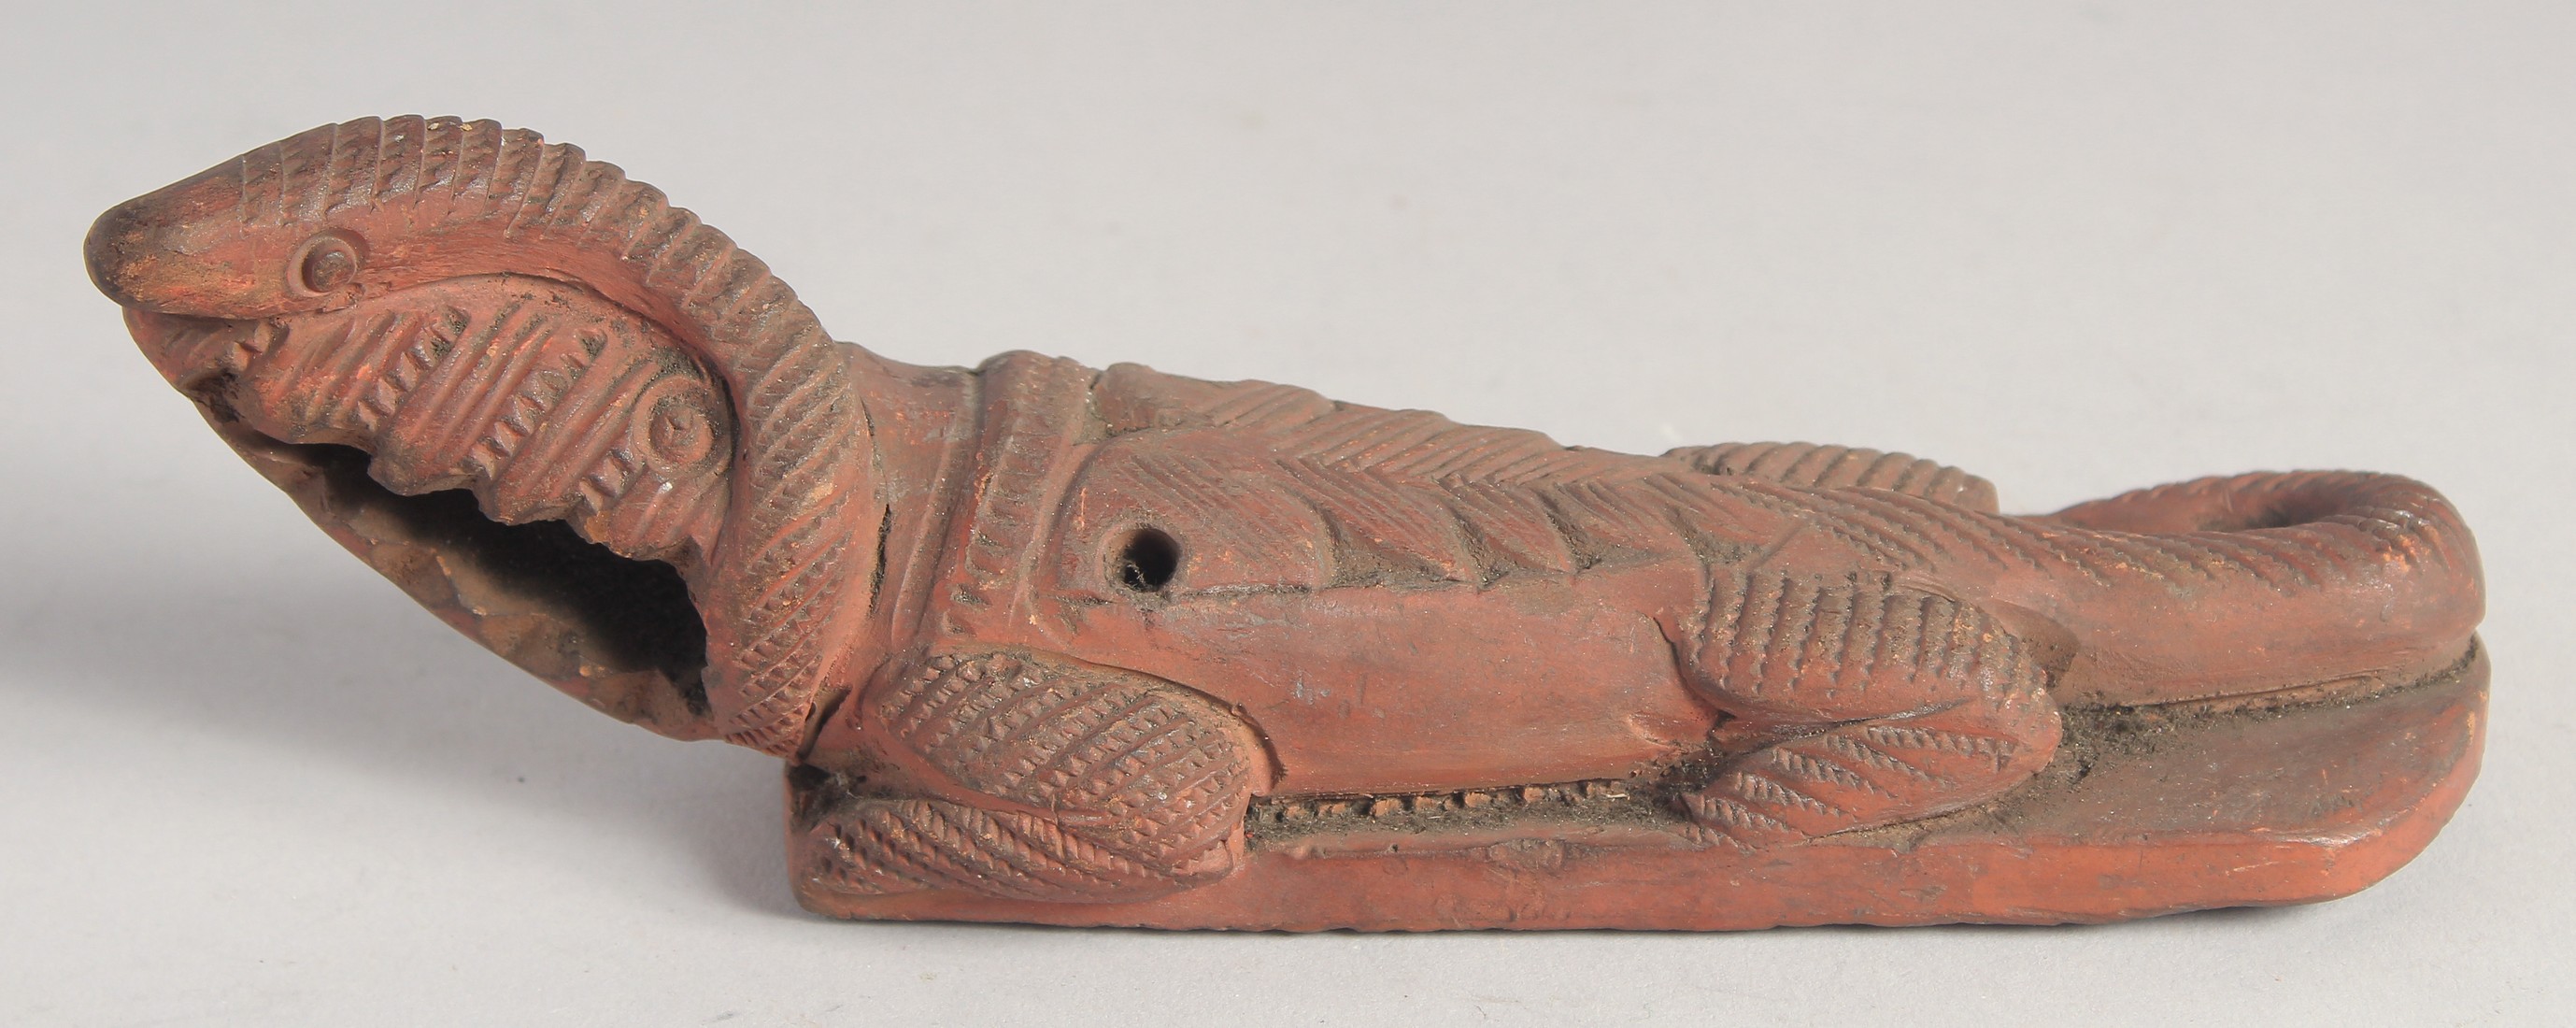 TWO 19TH CENTURY OTTOMAN EGYPTIAN TOPHANE CLAY CROCODILE FOOT SCRUBBERS. 22cm and 19cm - Image 7 of 8